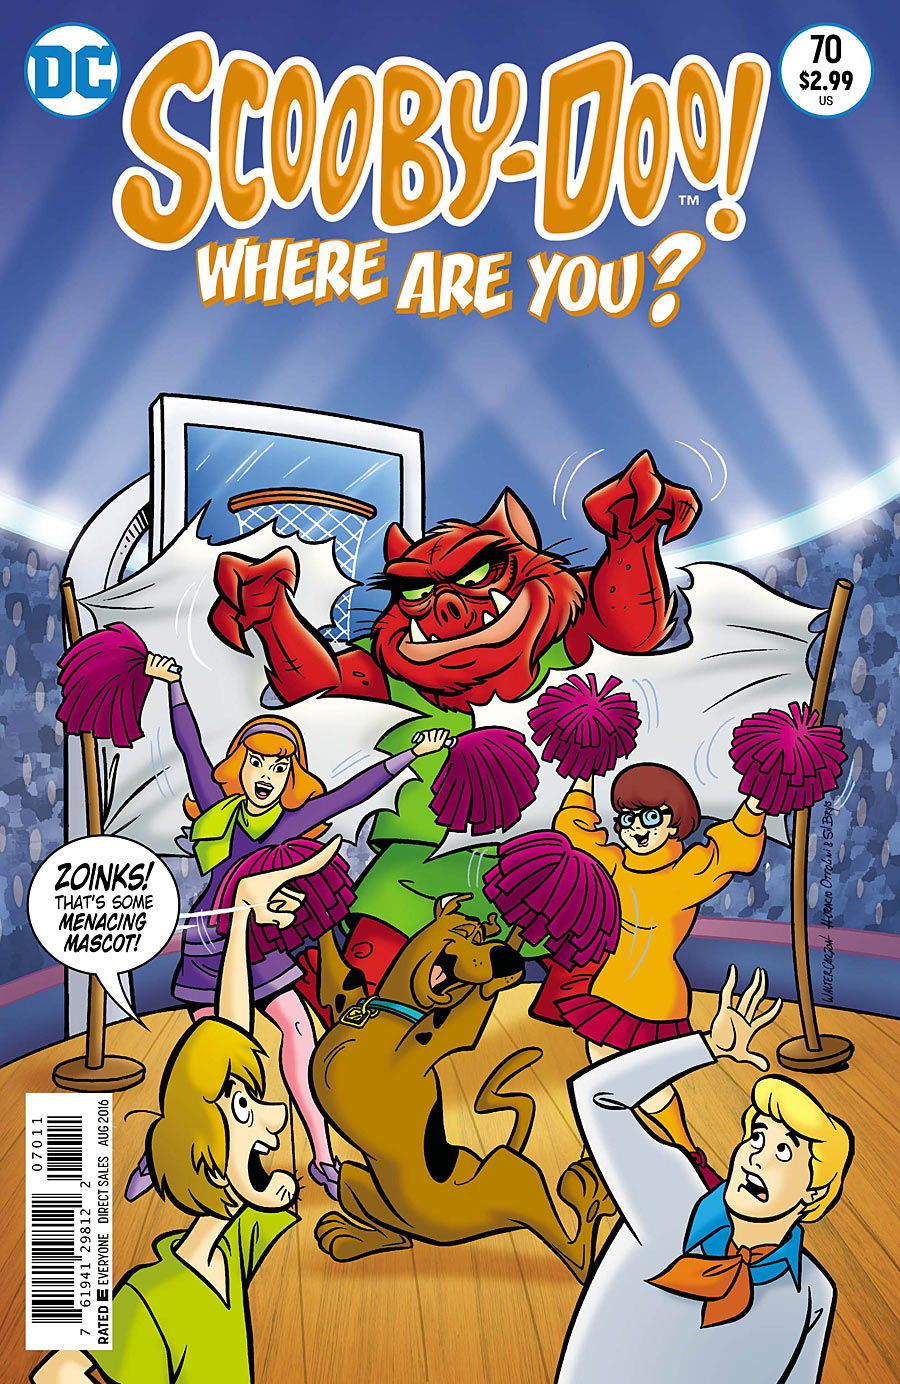 Scooby-Doo! Where Are You? issue 70 (DC Comics ...